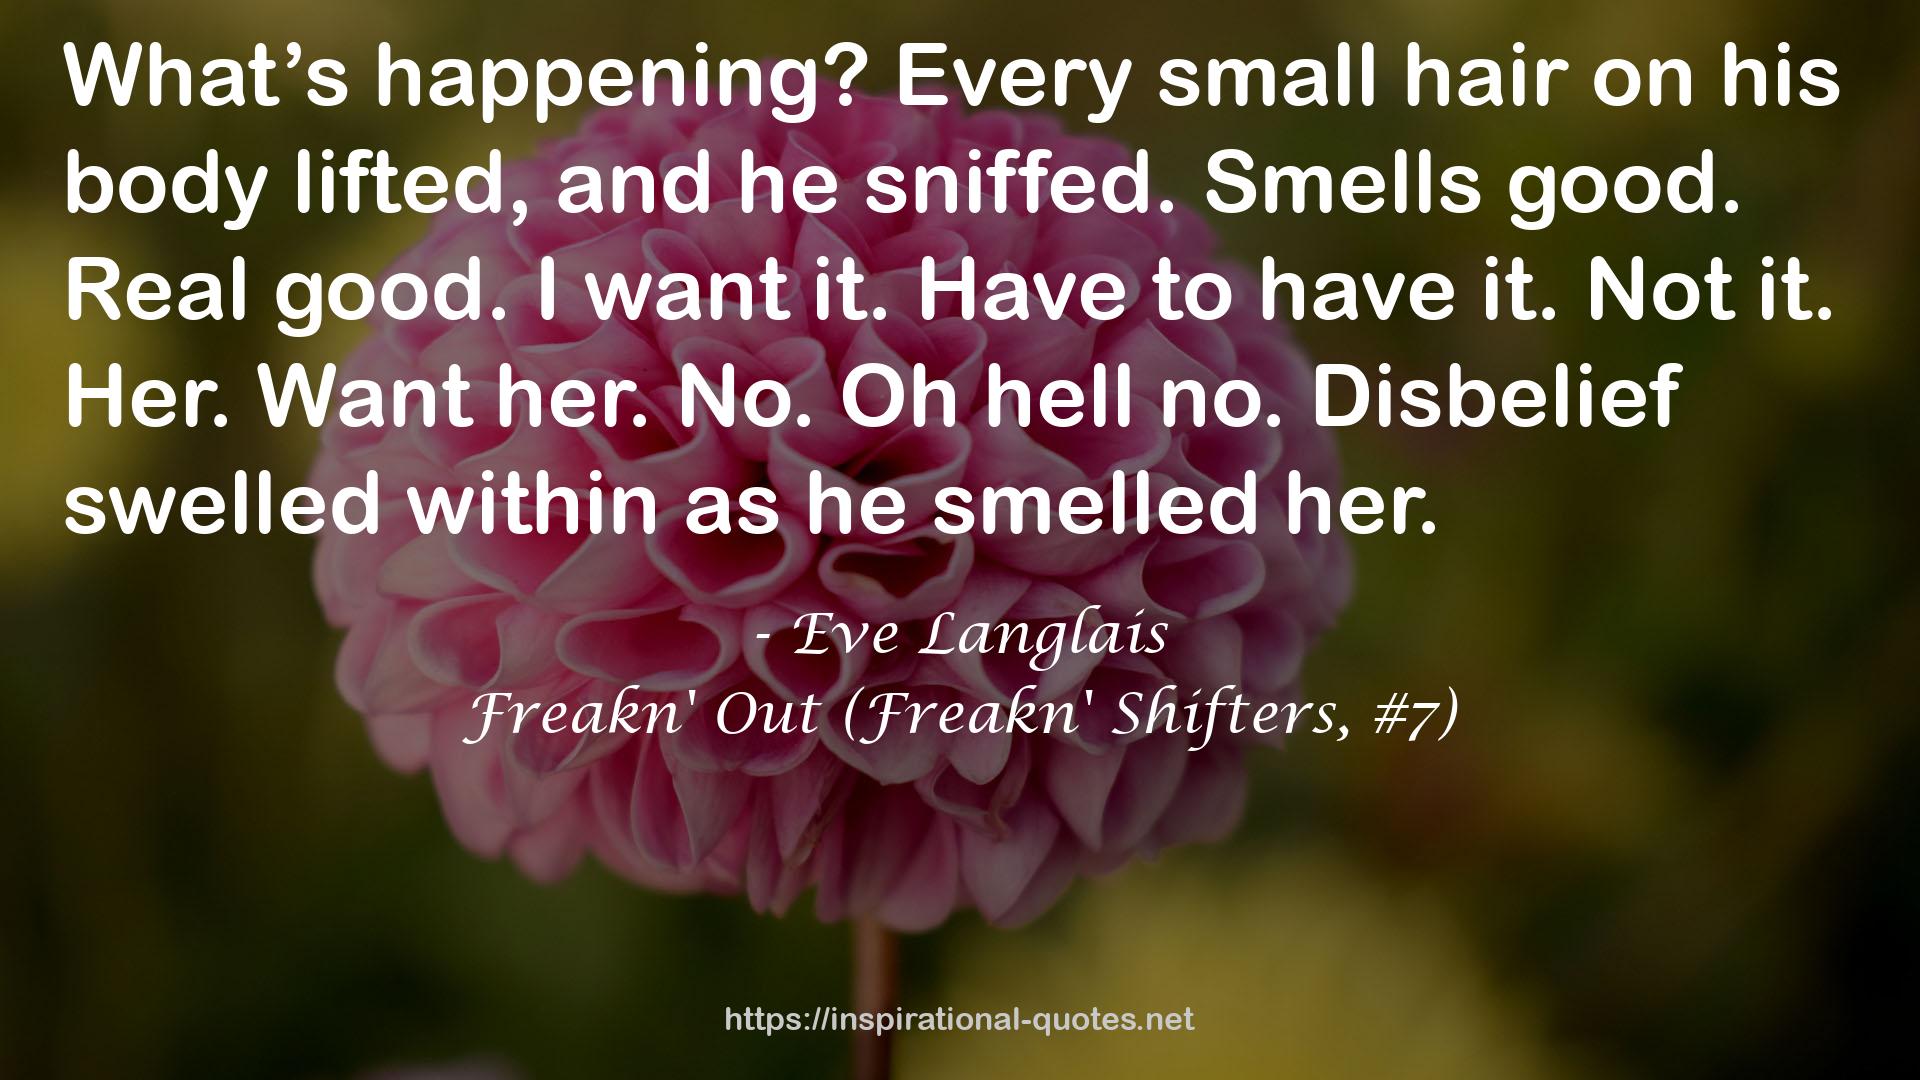 Freakn' Out (Freakn' Shifters, #7) QUOTES